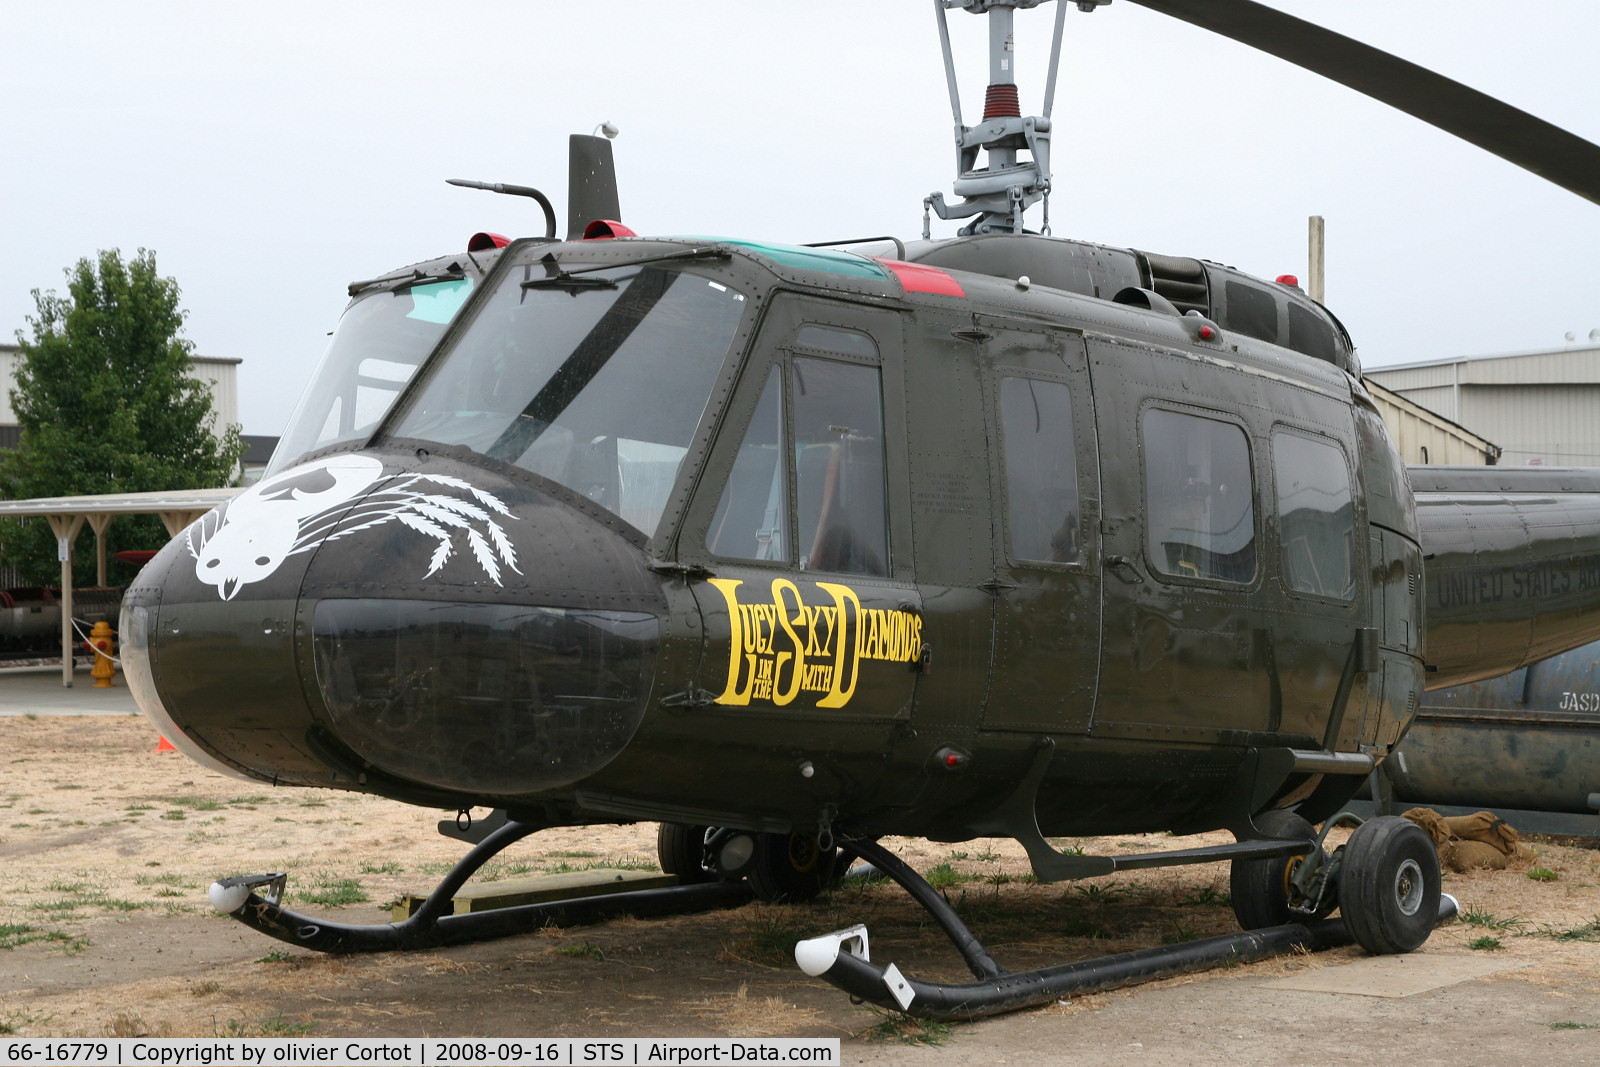 66-16779, 1966 Bell UH-1H Iroquois C/N 8973, Pacific coast air museum